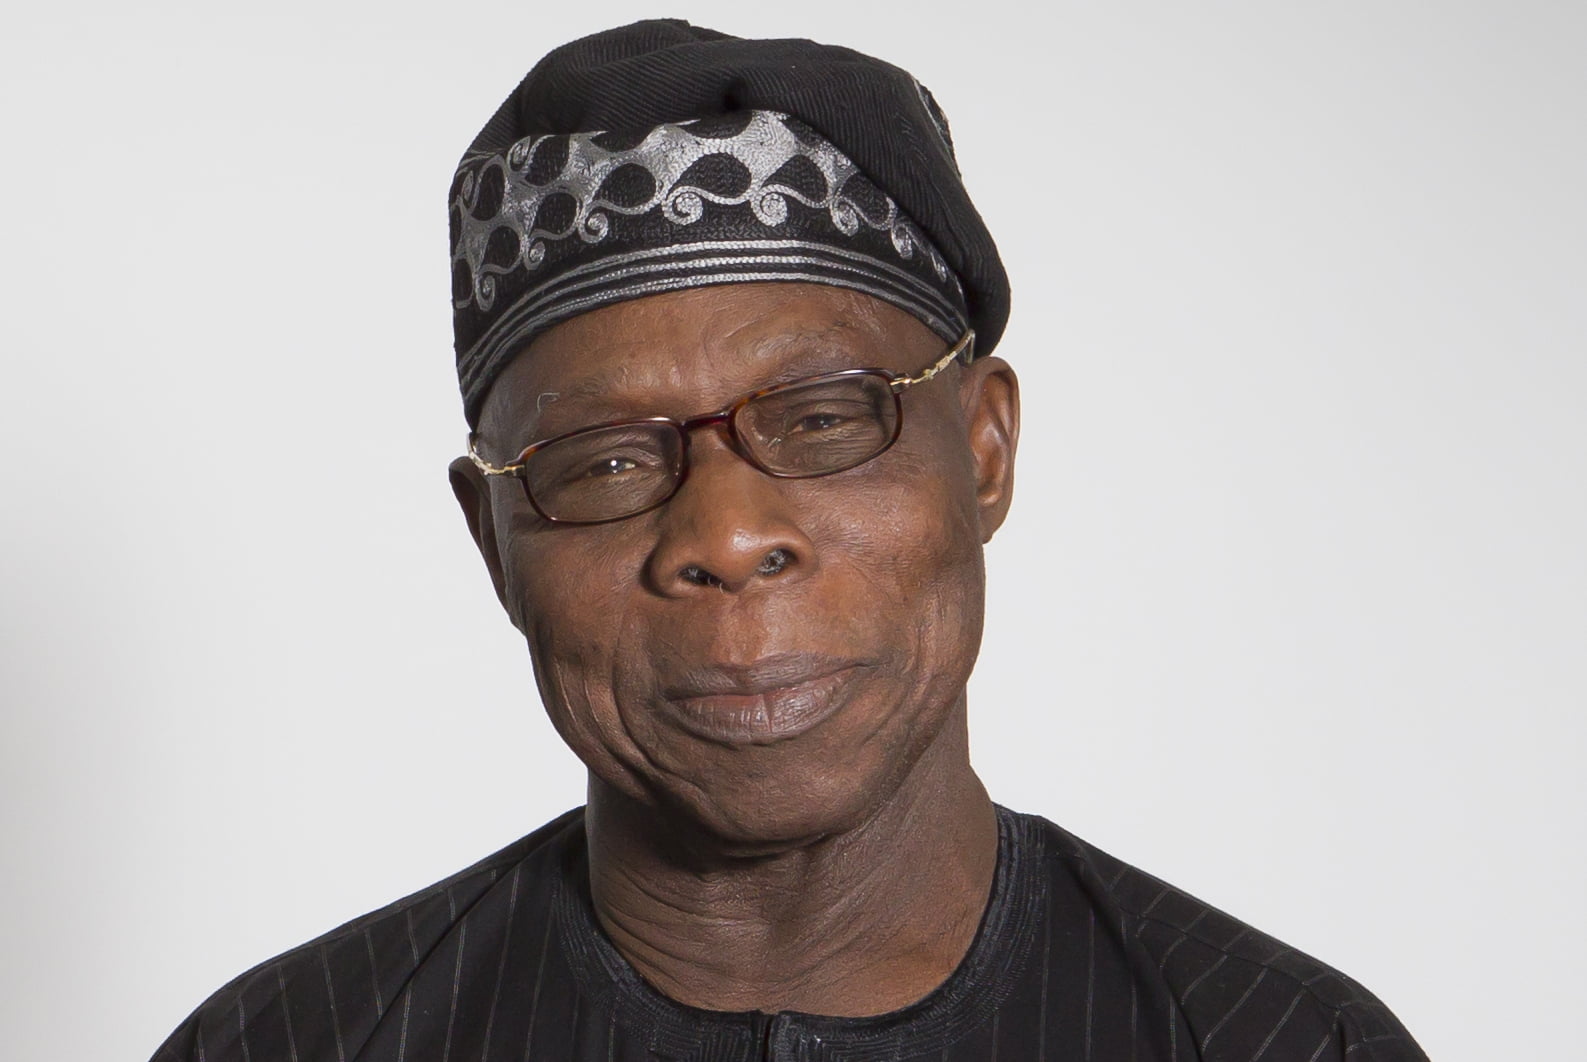 2023 election: Obasanjo praised for advocating power shift to youth